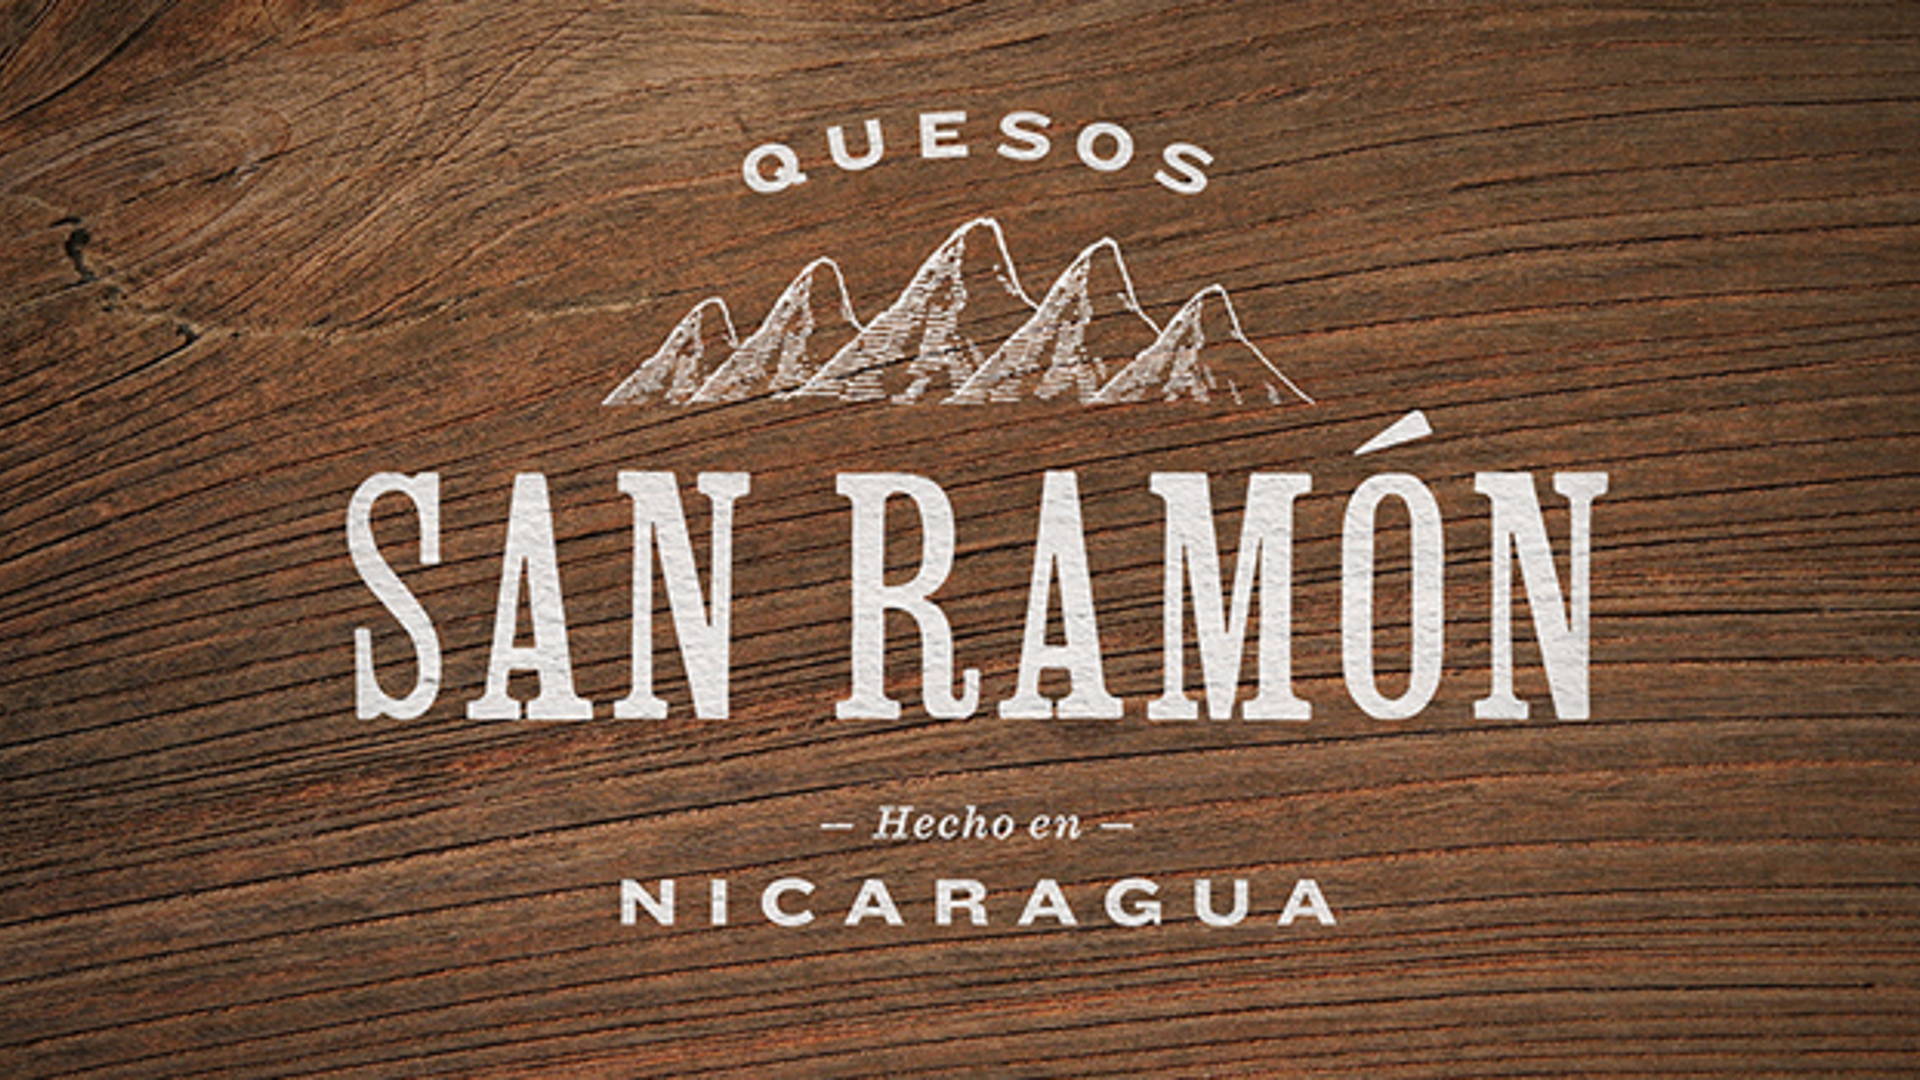 Featured image for Quesos San Ramón